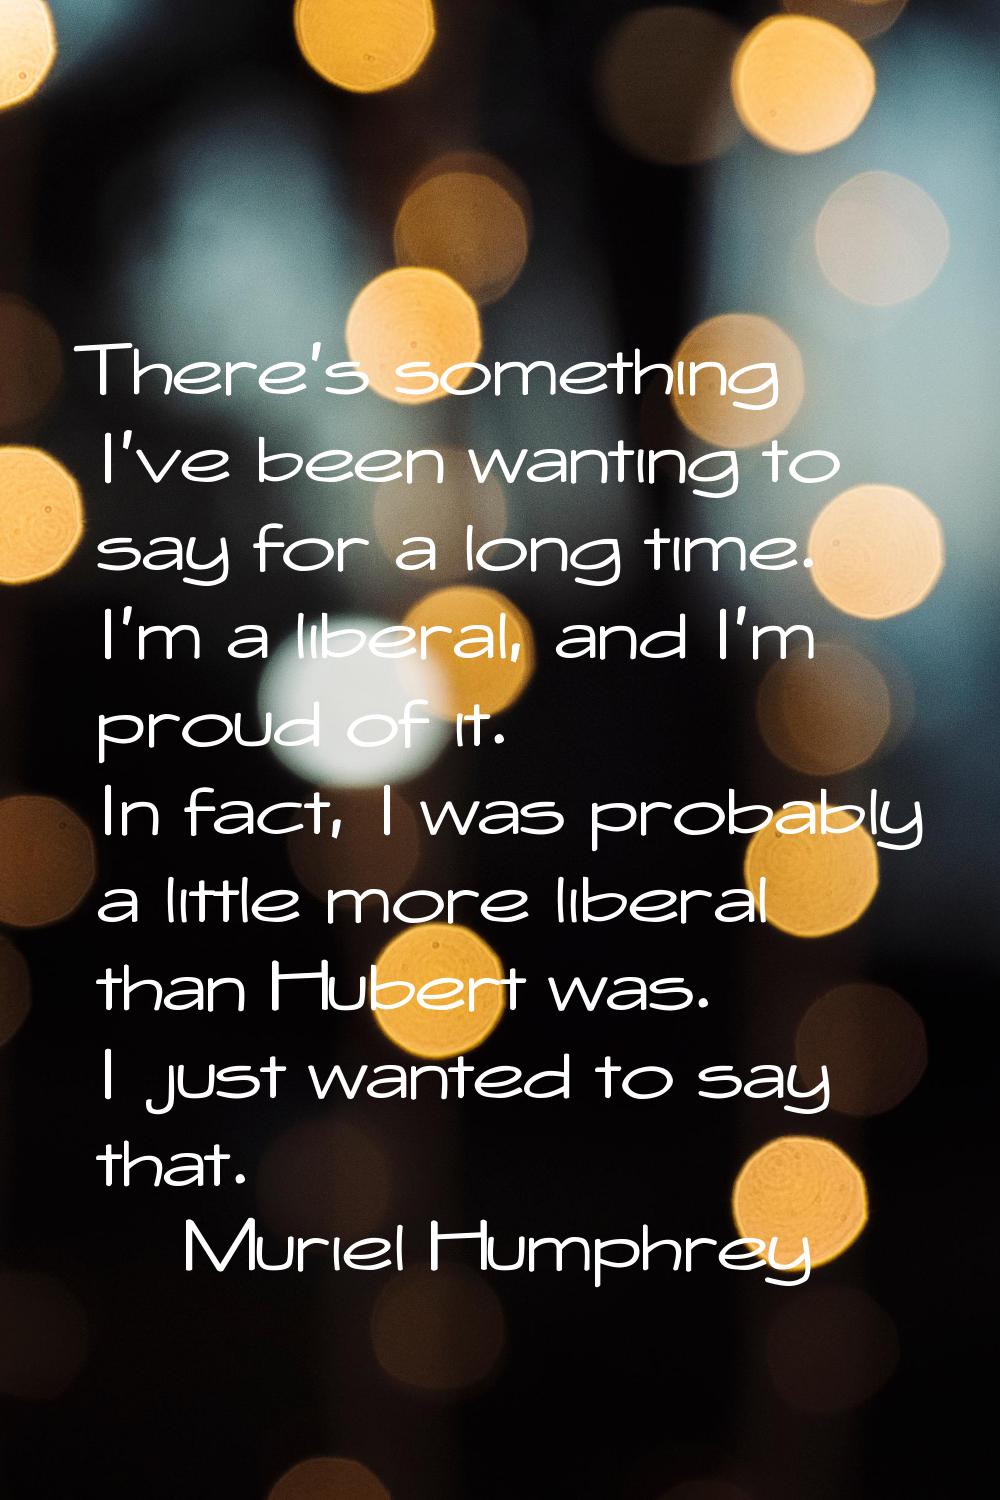 There's something I've been wanting to say for a long time. I'm a liberal, and I'm proud of it. In 